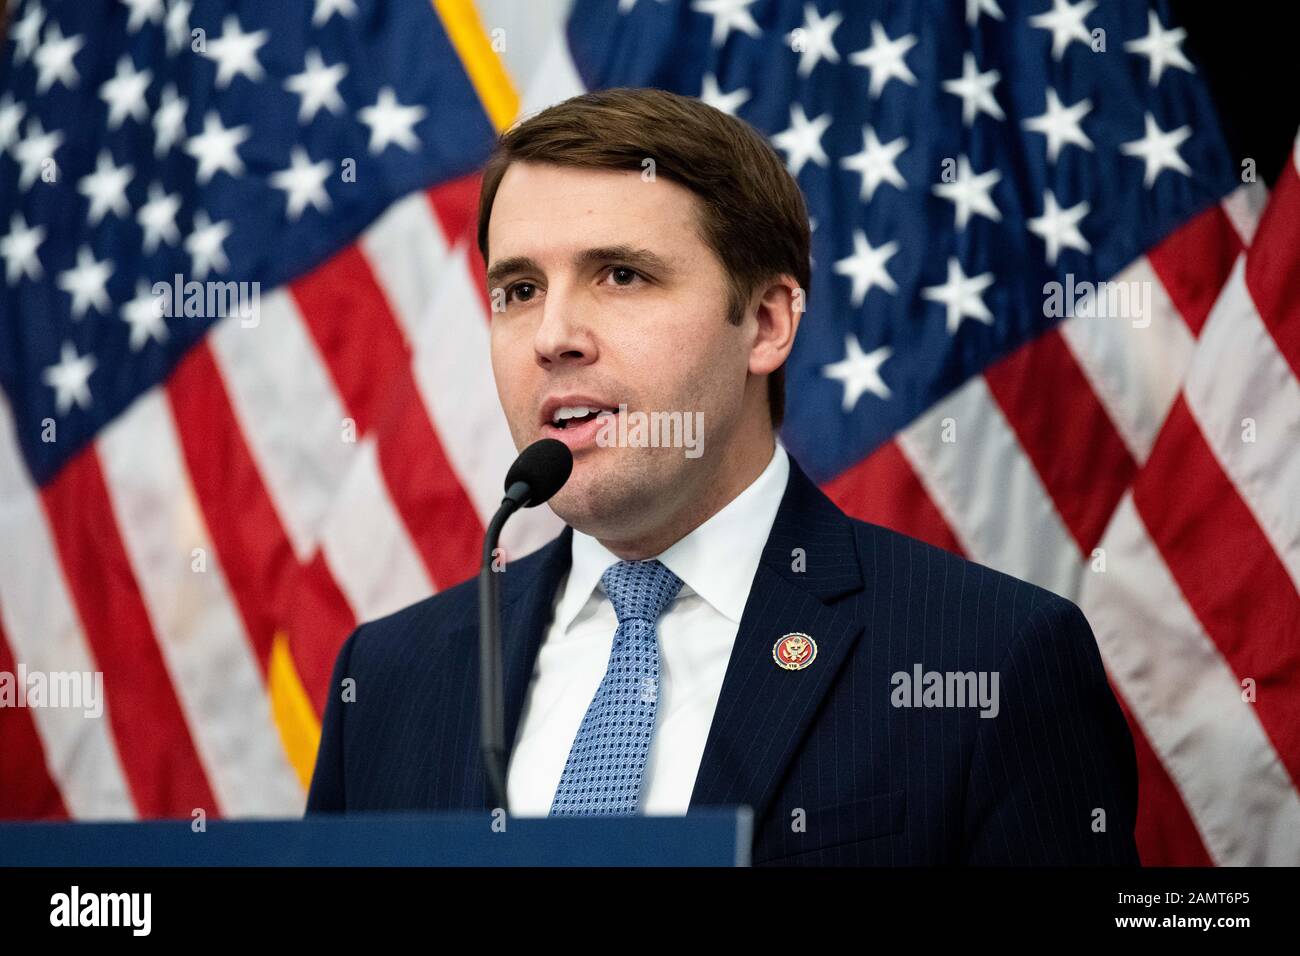 January 14, 2020 - Washington, DC, United States:  U.S. Representative Chris Pappas (D-NH) speaking at an event for the ten year anniversary of the Citizens United Decision. (Photo by Michael Brochstein/Sipa USA) Stock Photo